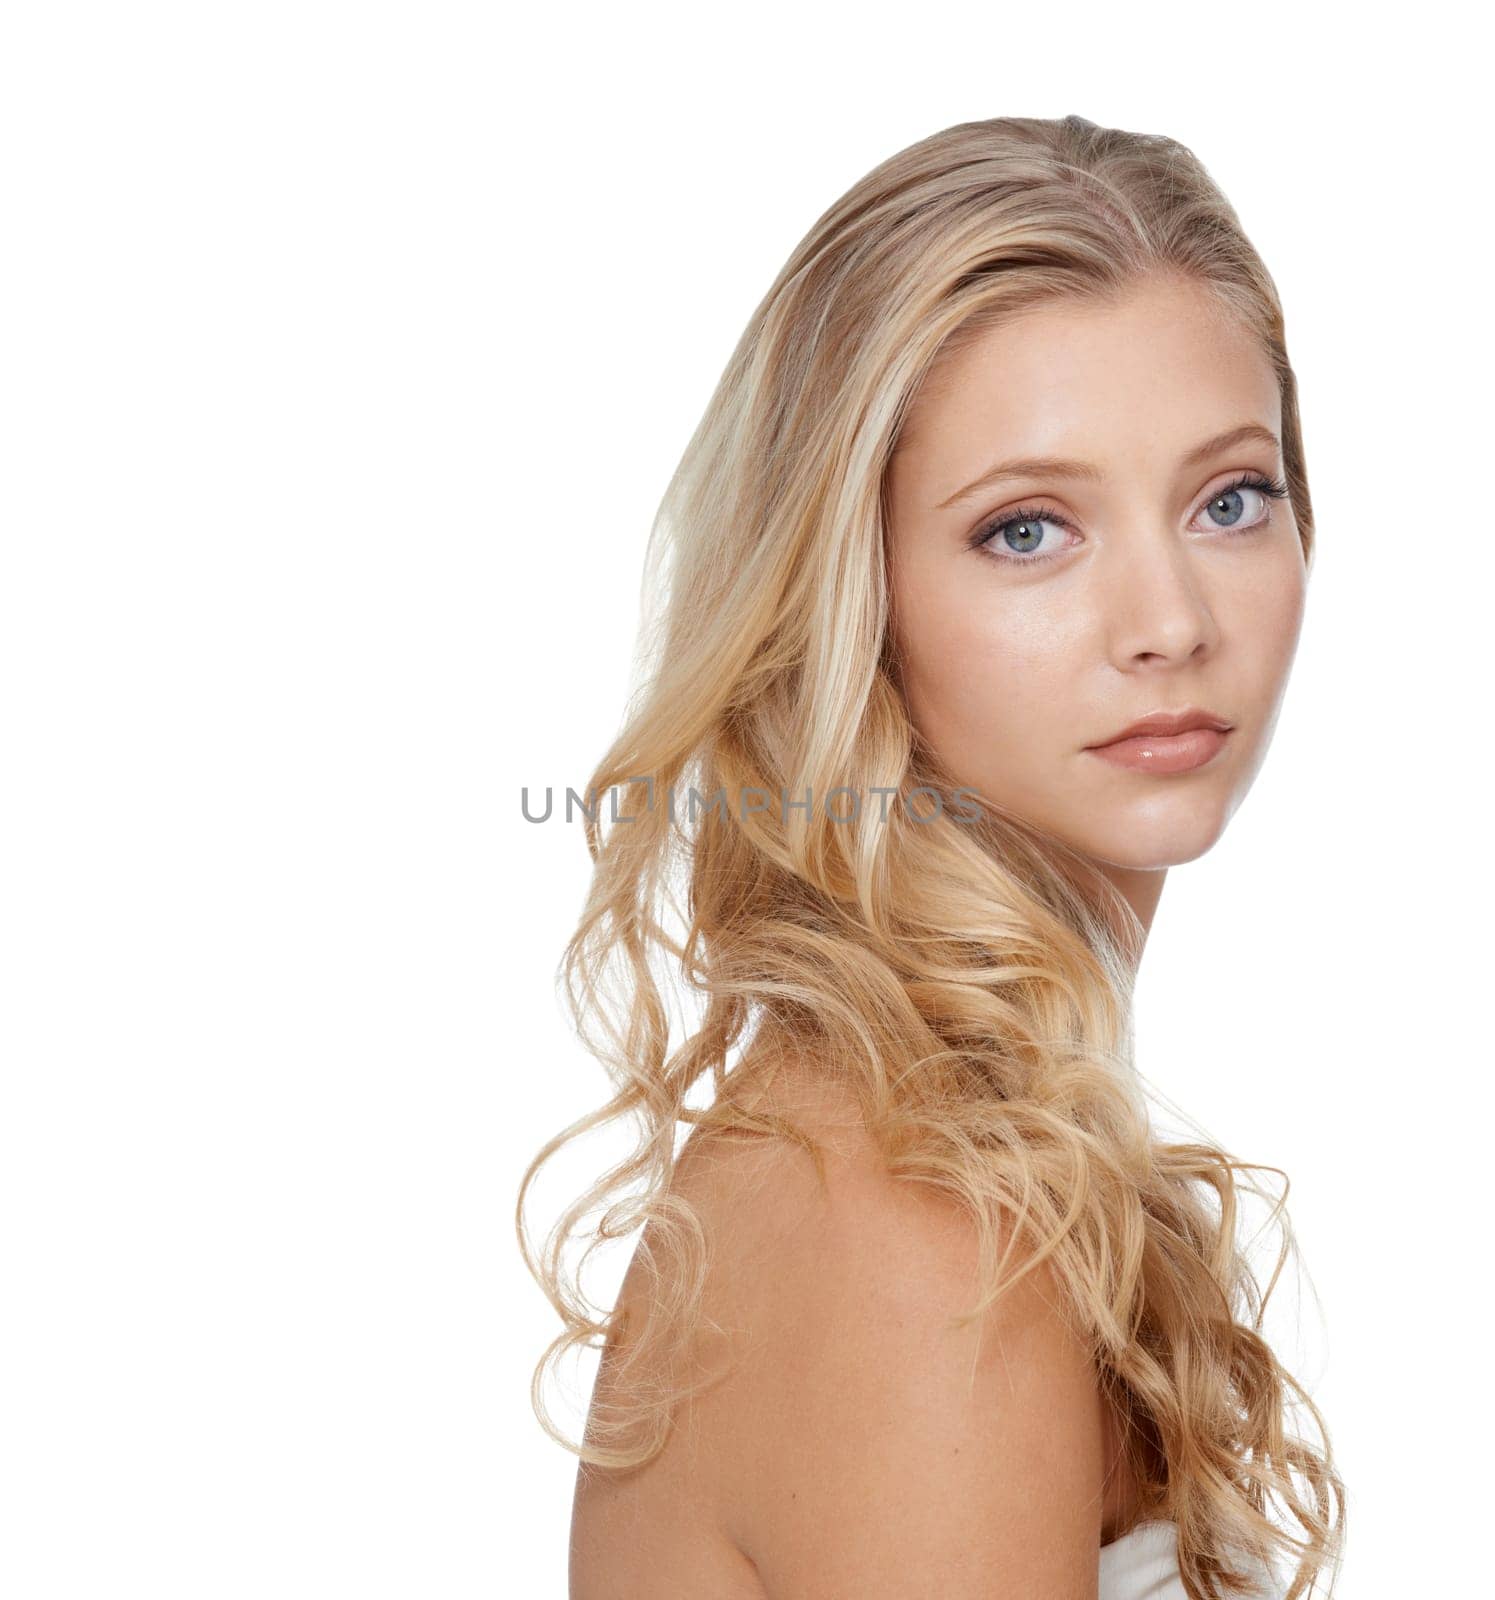 Woman, portrait and beauty with cosmetics in studio for hair care, salon treatment and shampoo shine. Model, person and mock up space with skincare, collagen texture and hairstyle on white background.